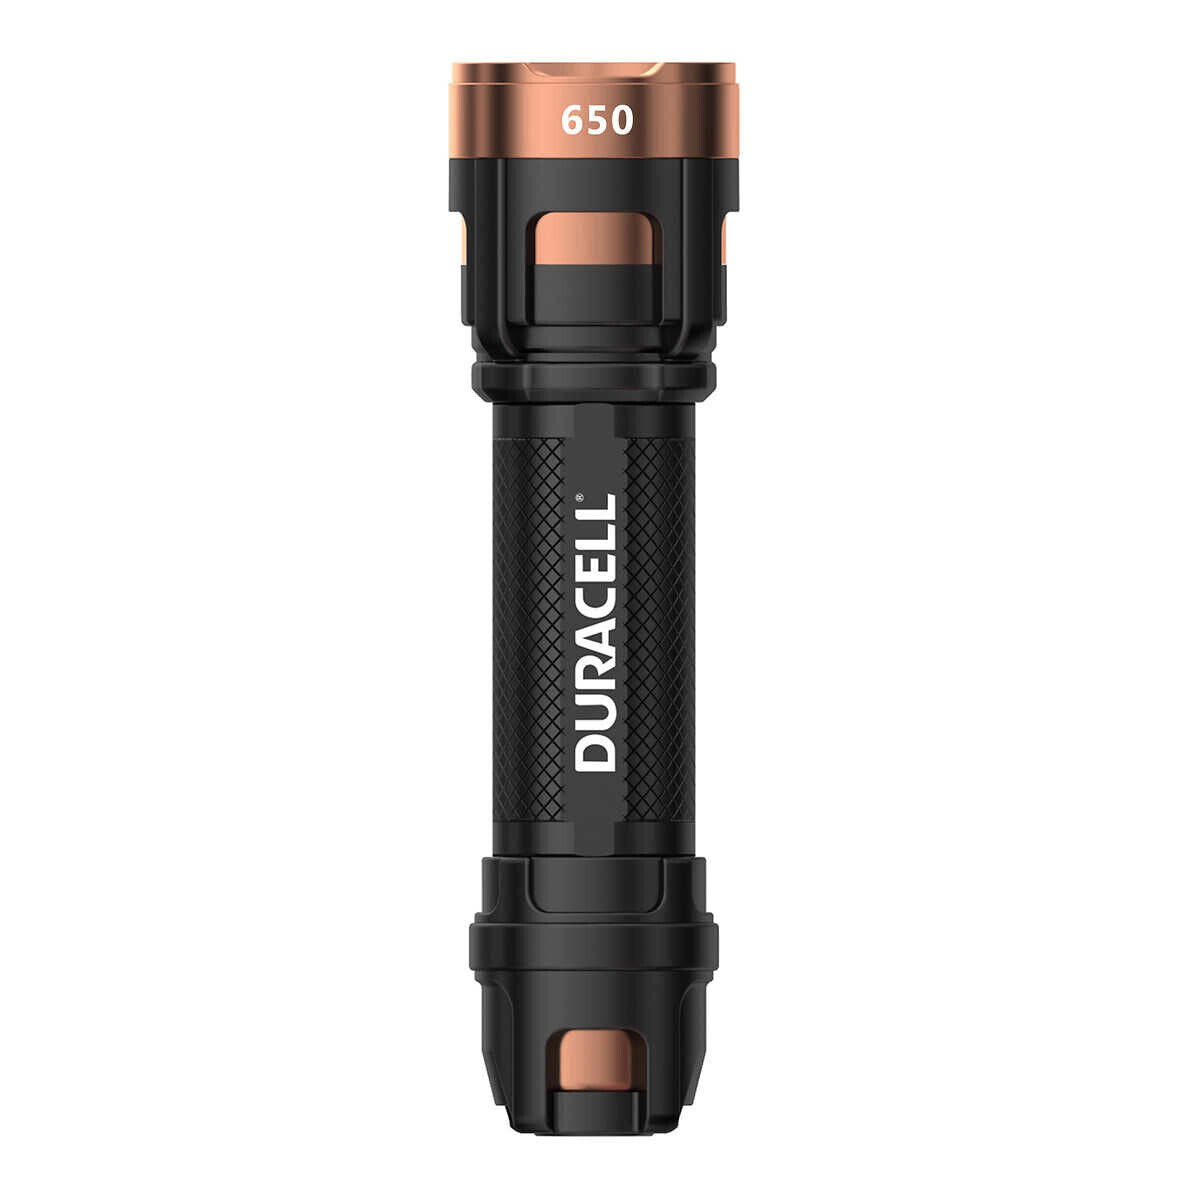 Torch LED Flashlight Duracell bright 650LM Aluminium DuraBeam Batteries Included